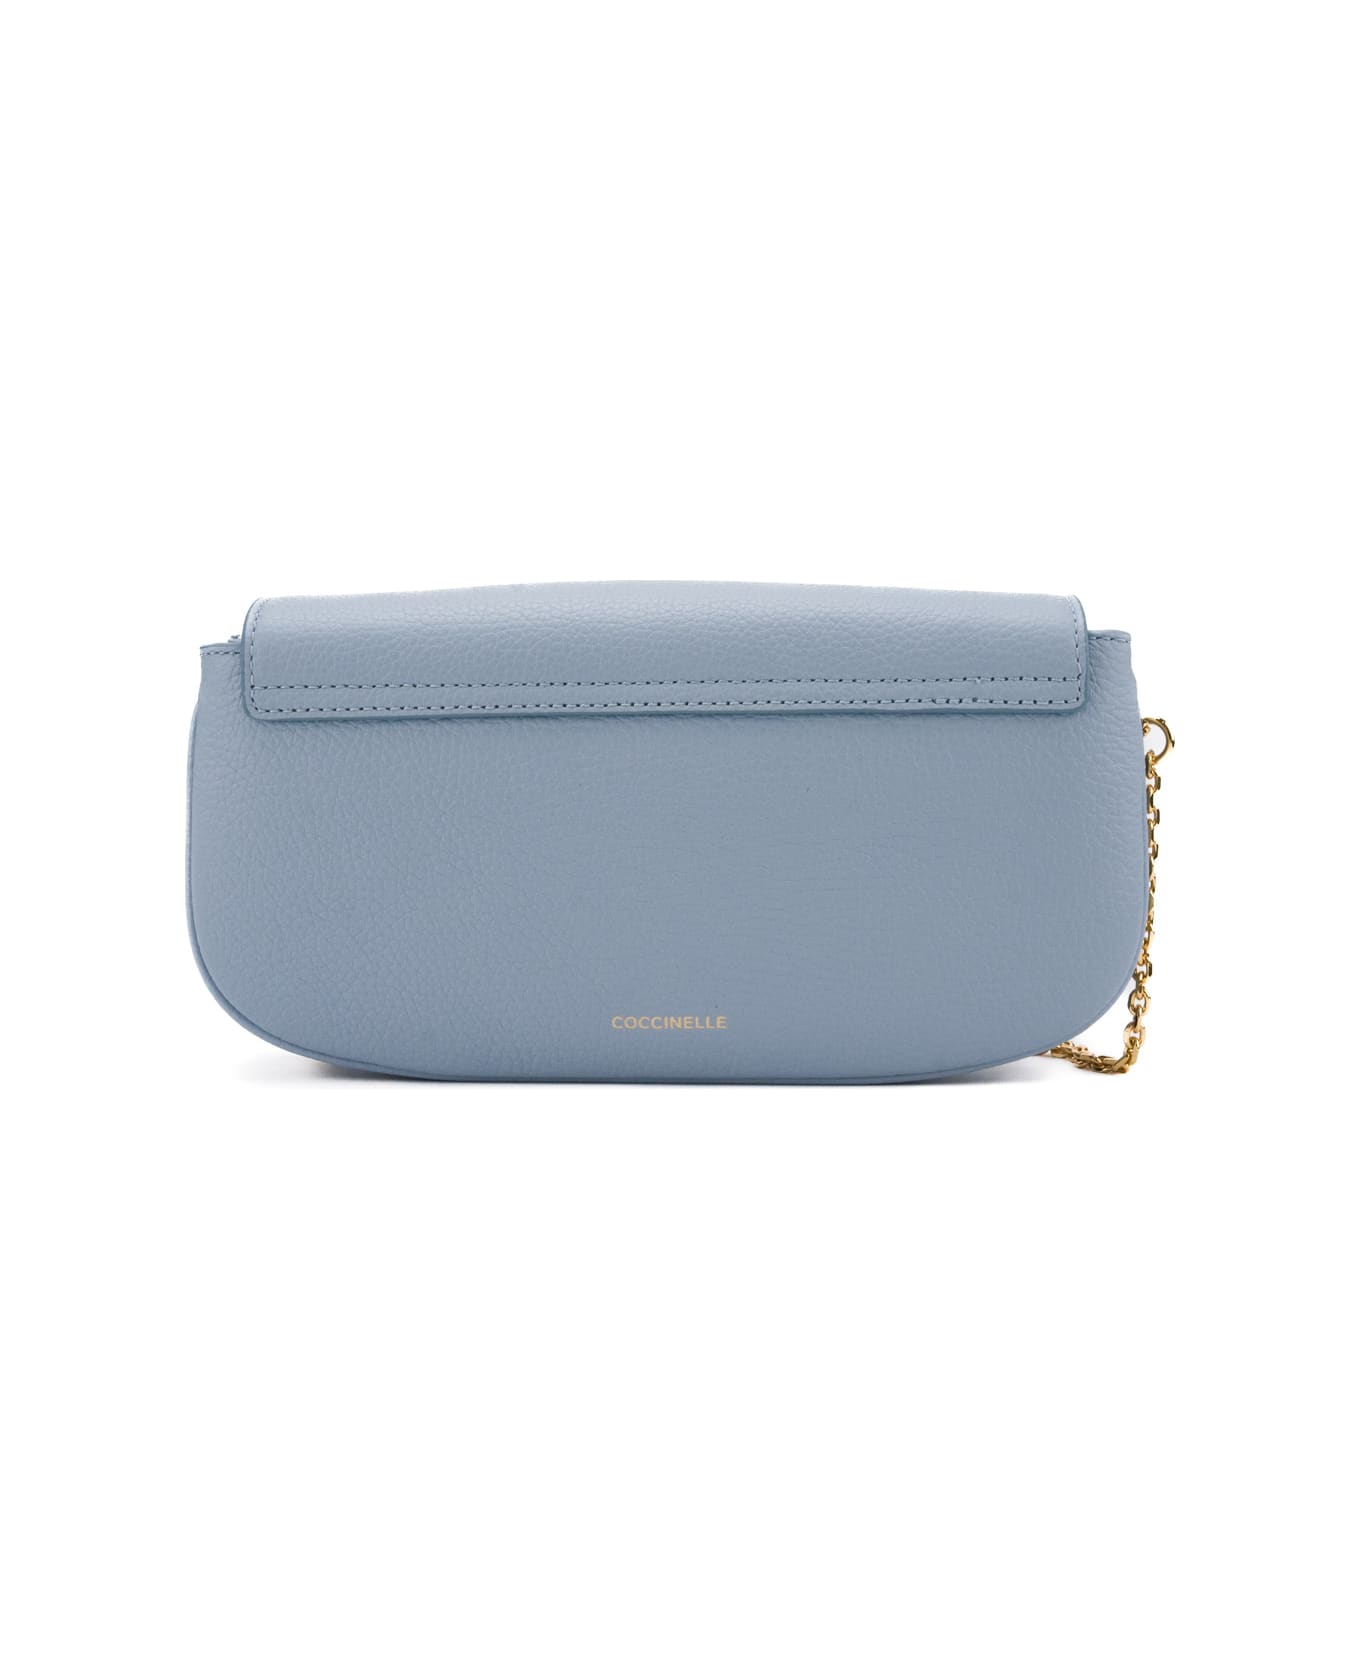 Coccinelle Dew Leather Bag - Gnawed Blue